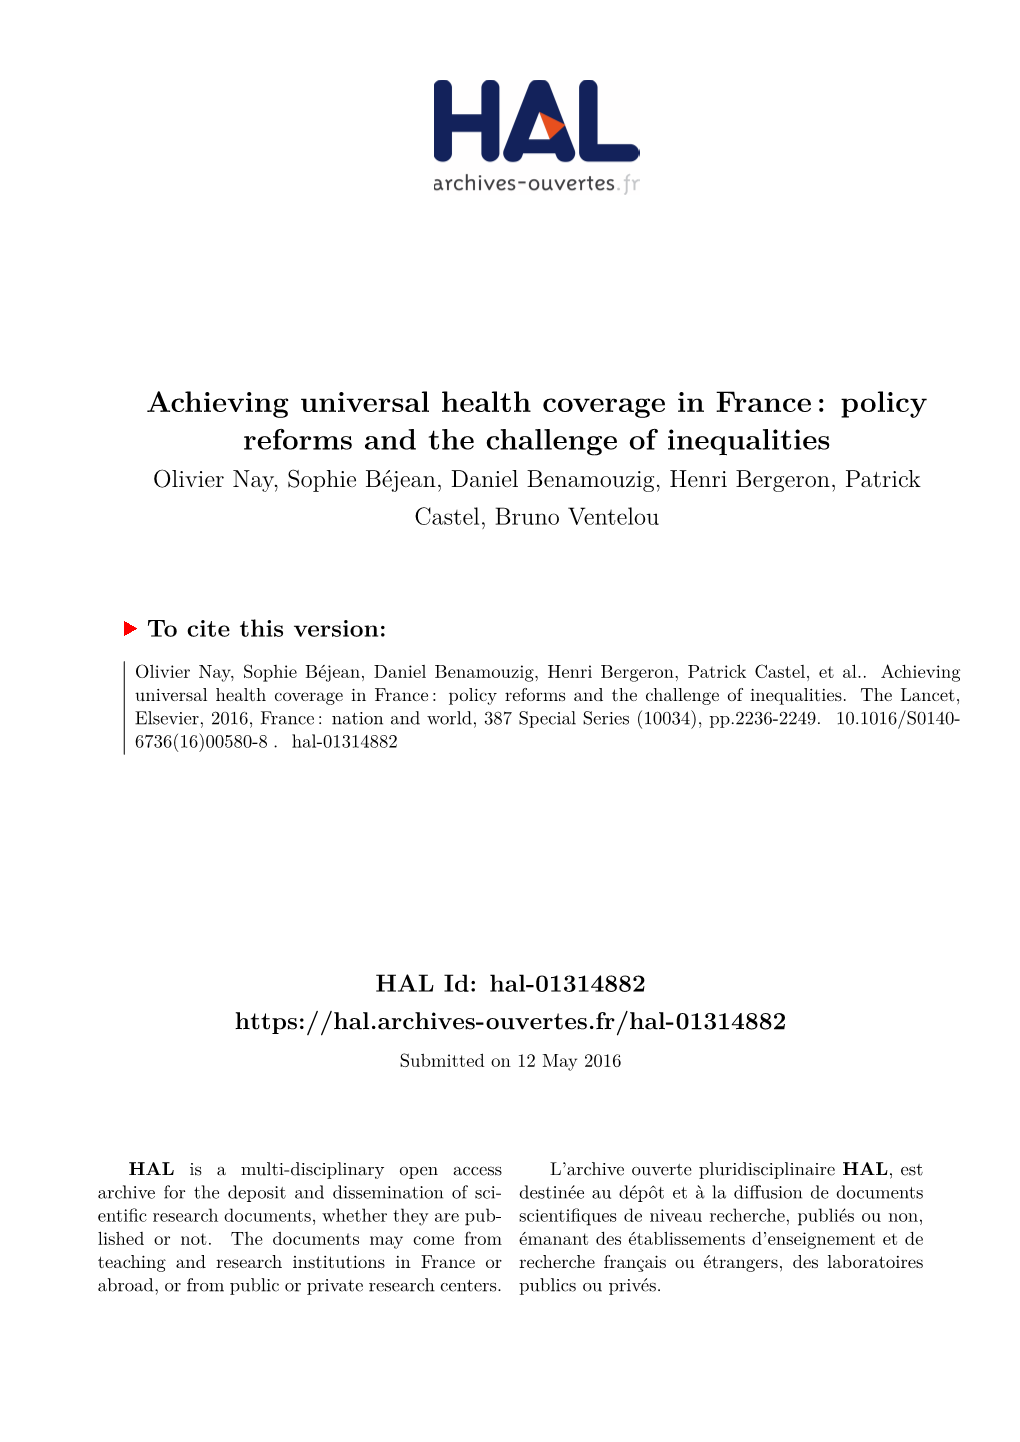 Achieving Universal Health Coverage in France